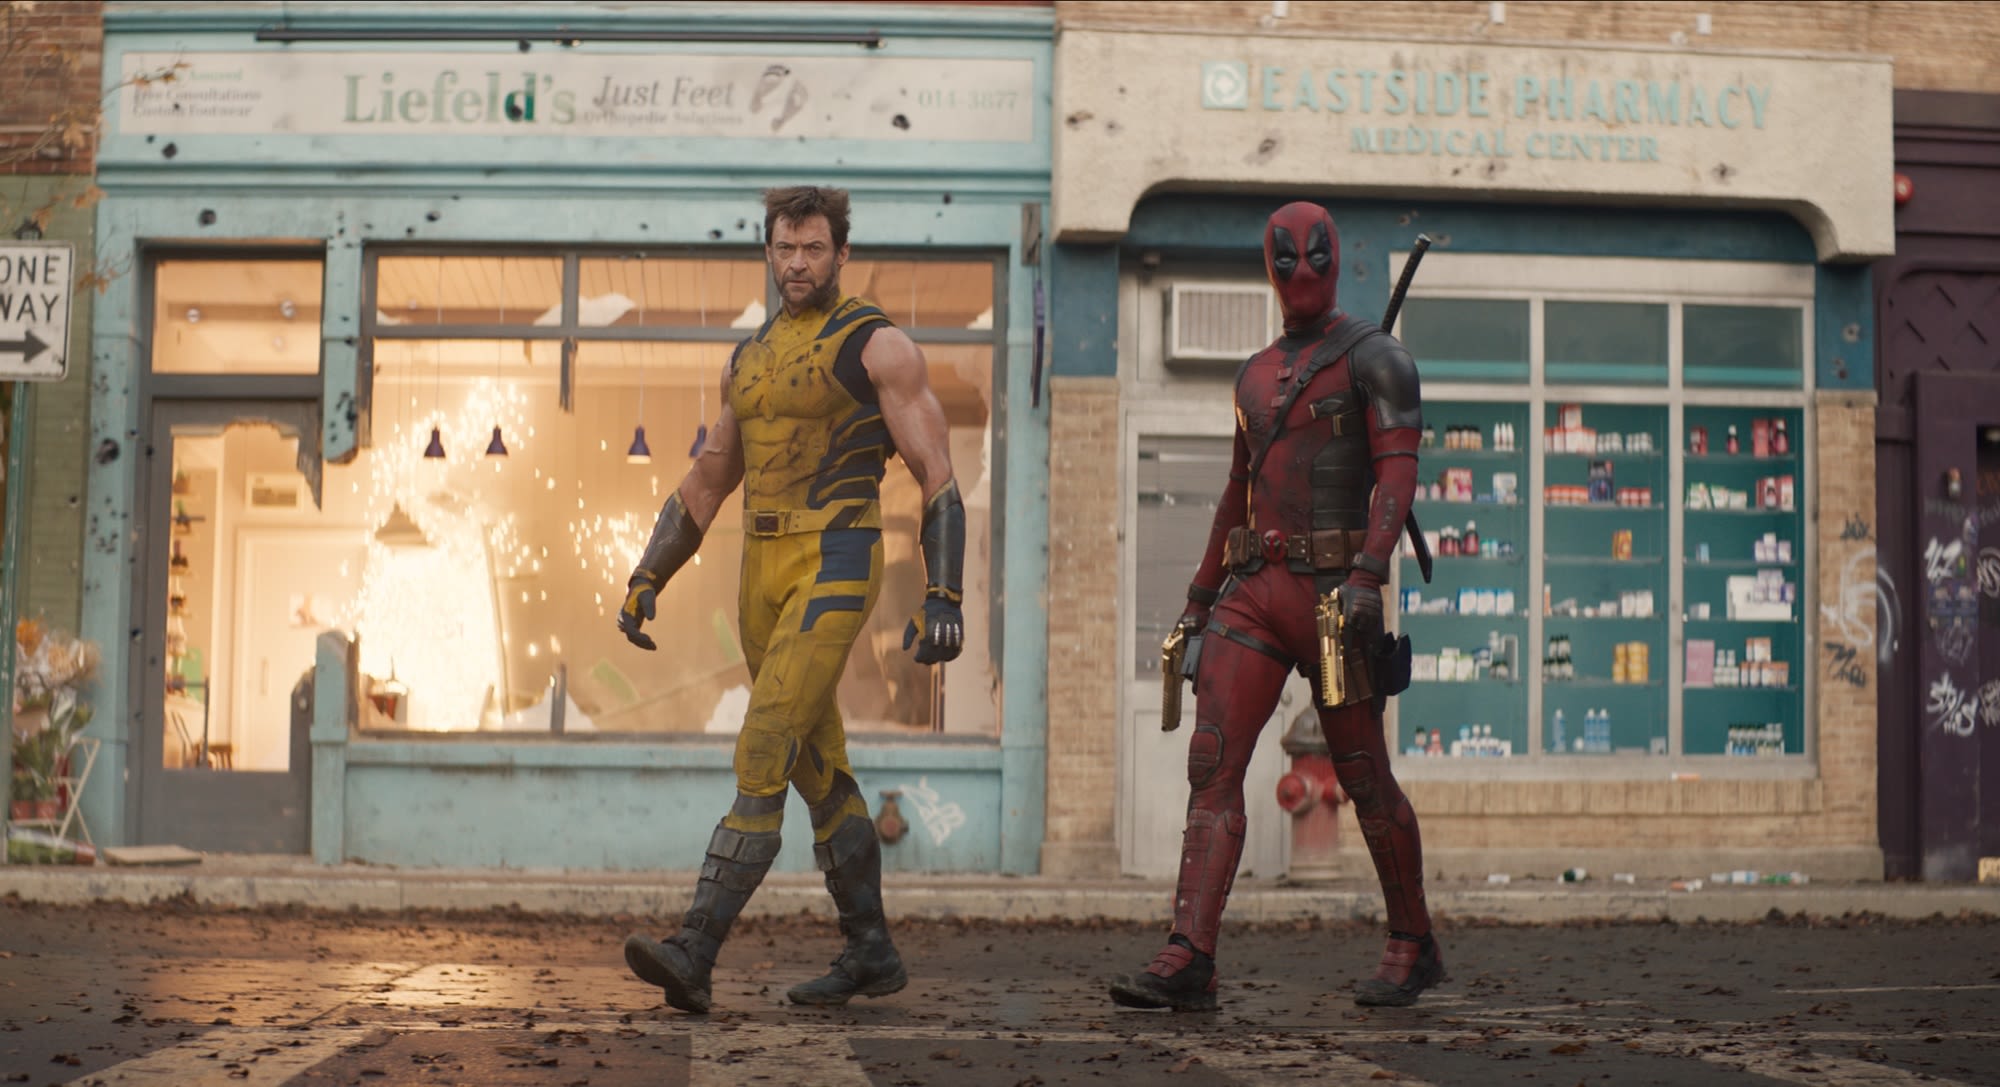 Is Marvel making Deadpool 4? Not even Deadpool & Wolverine director Shawn Levy knows